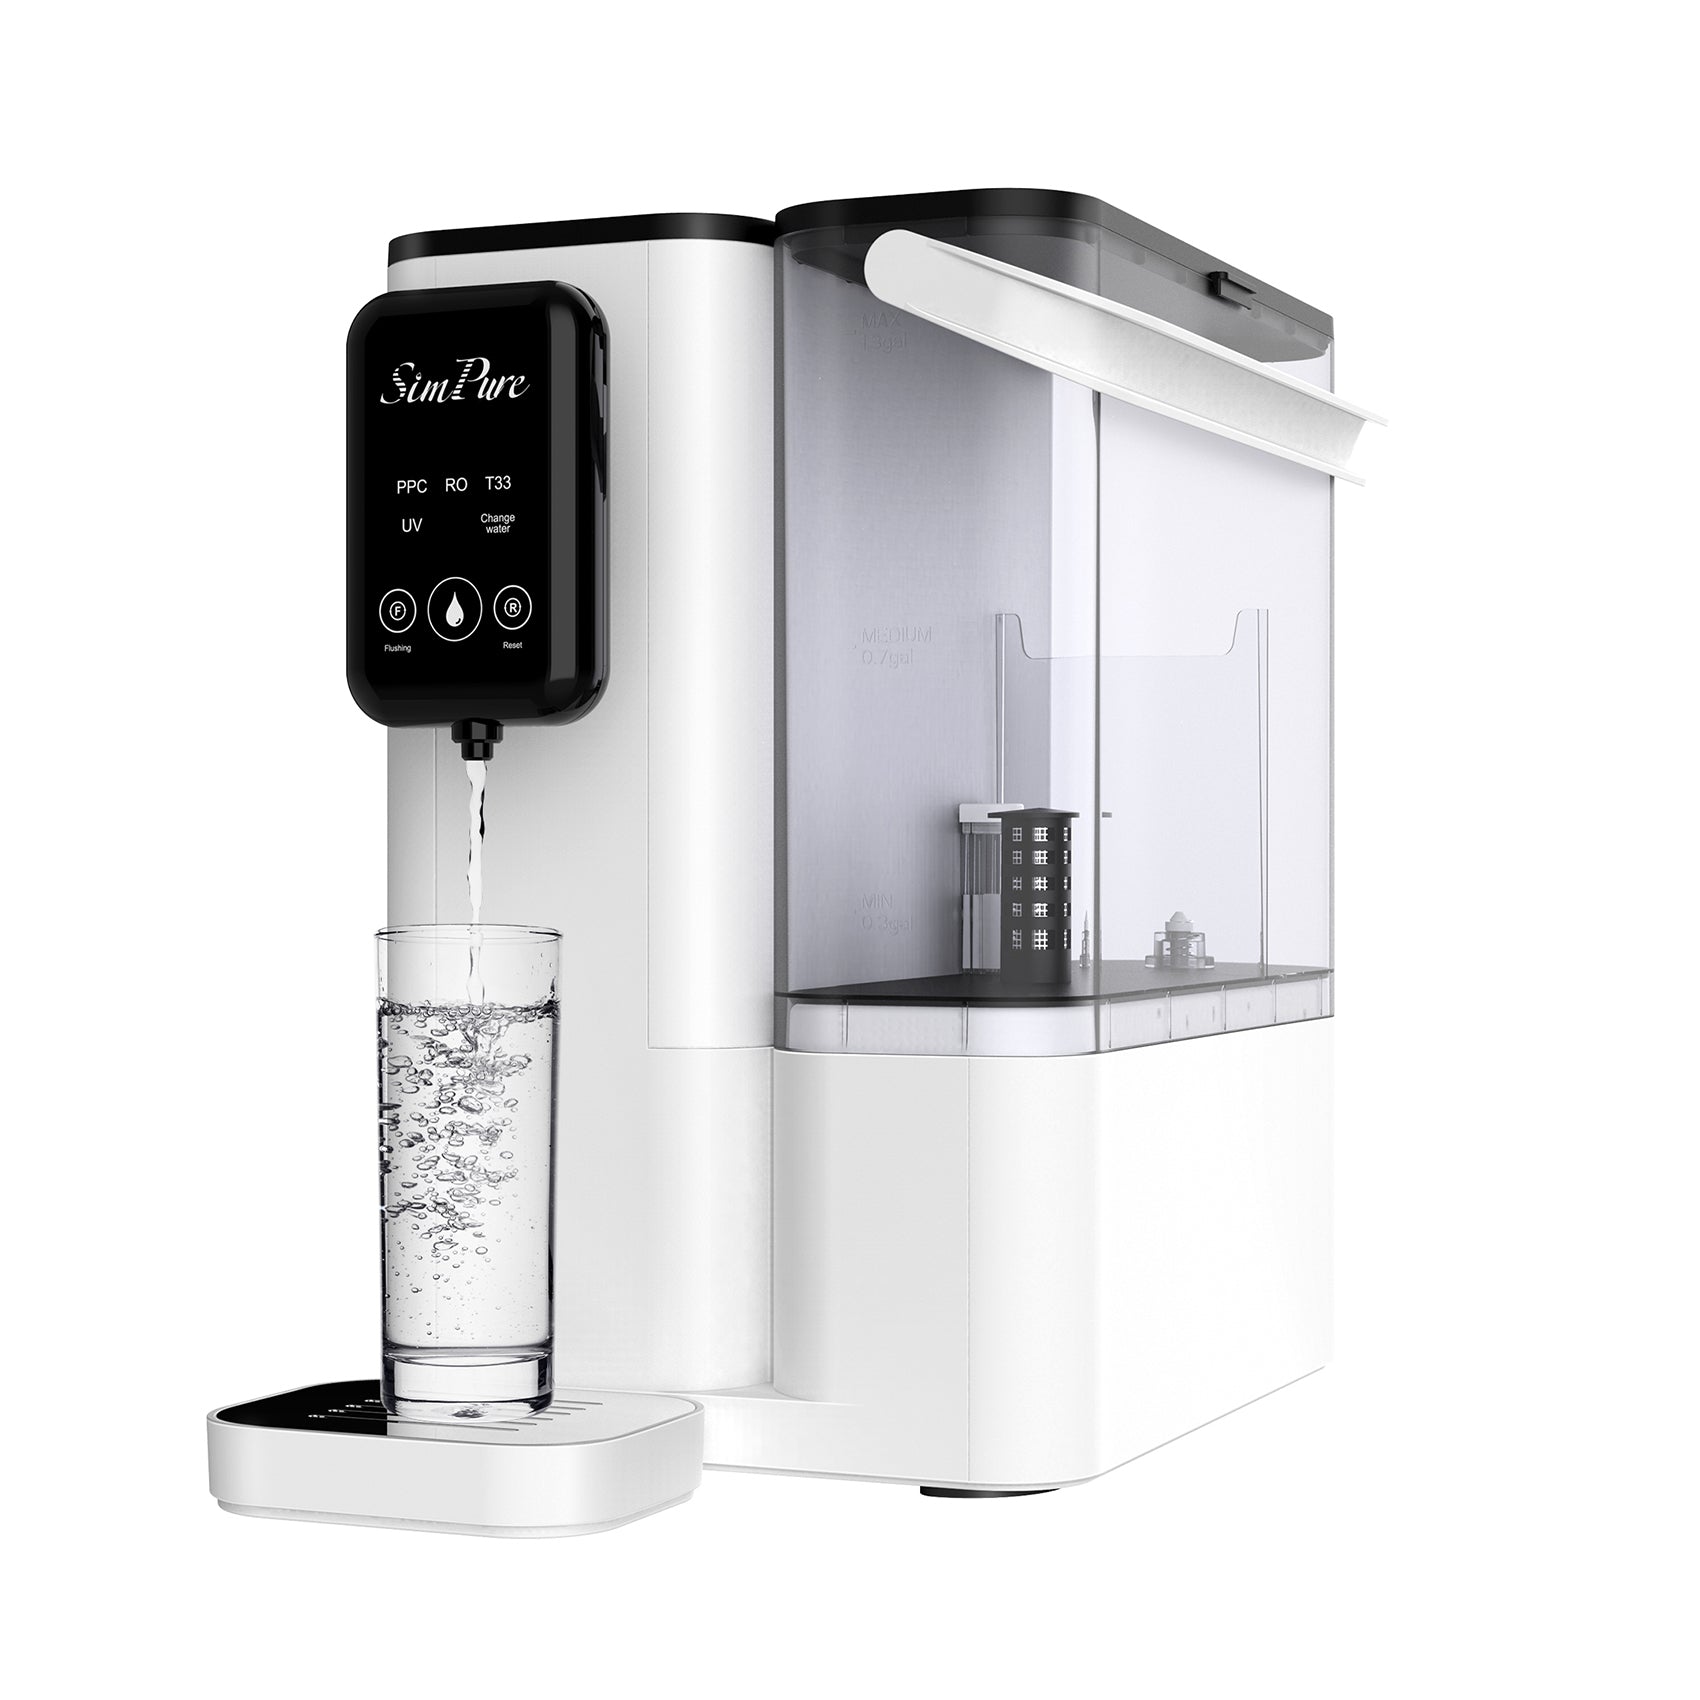 SimPure Y9T 300GPD Countertop RO Water Filter System | Pre-Filter+PP+CTO+RO+T33+UV 6-Stage Filtration